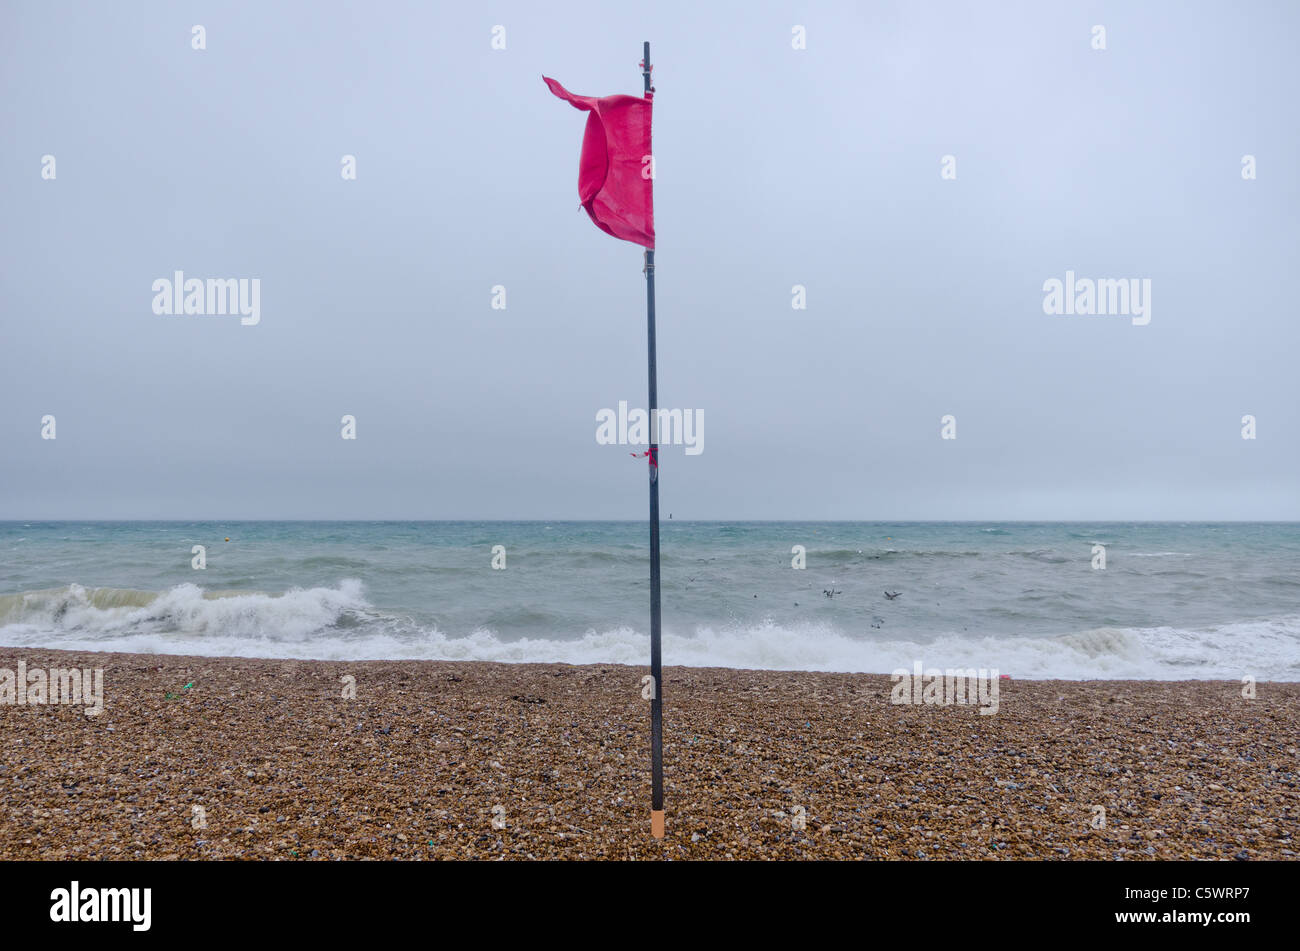 A man braves the stormy weather at Saltdean, East East Sussex, promenade, as waves hit the breakwater. Stock Photo